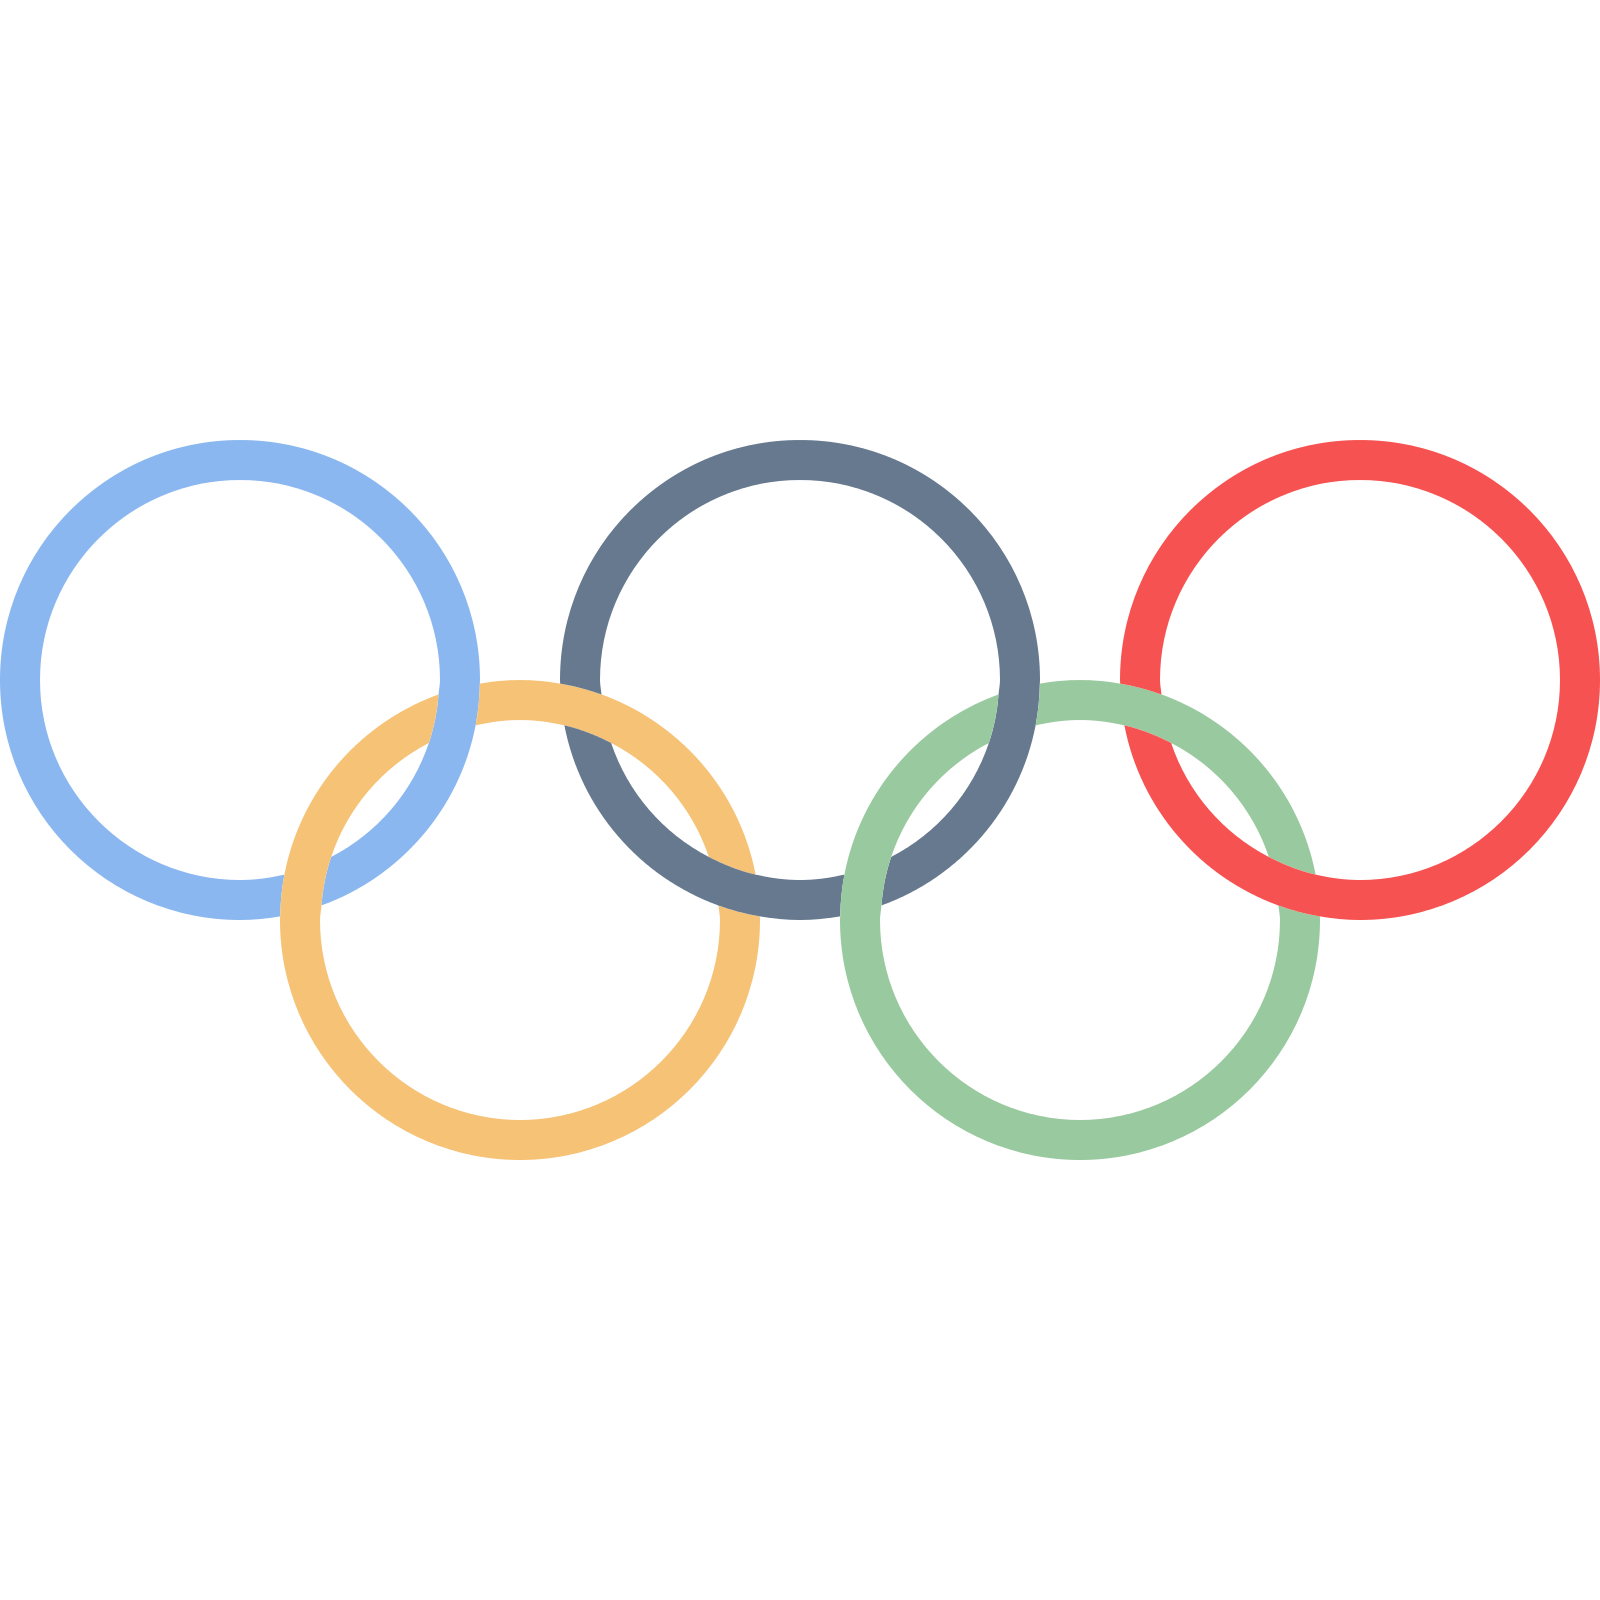 Olympic rings PNG transparent image download, size 1600x1600px